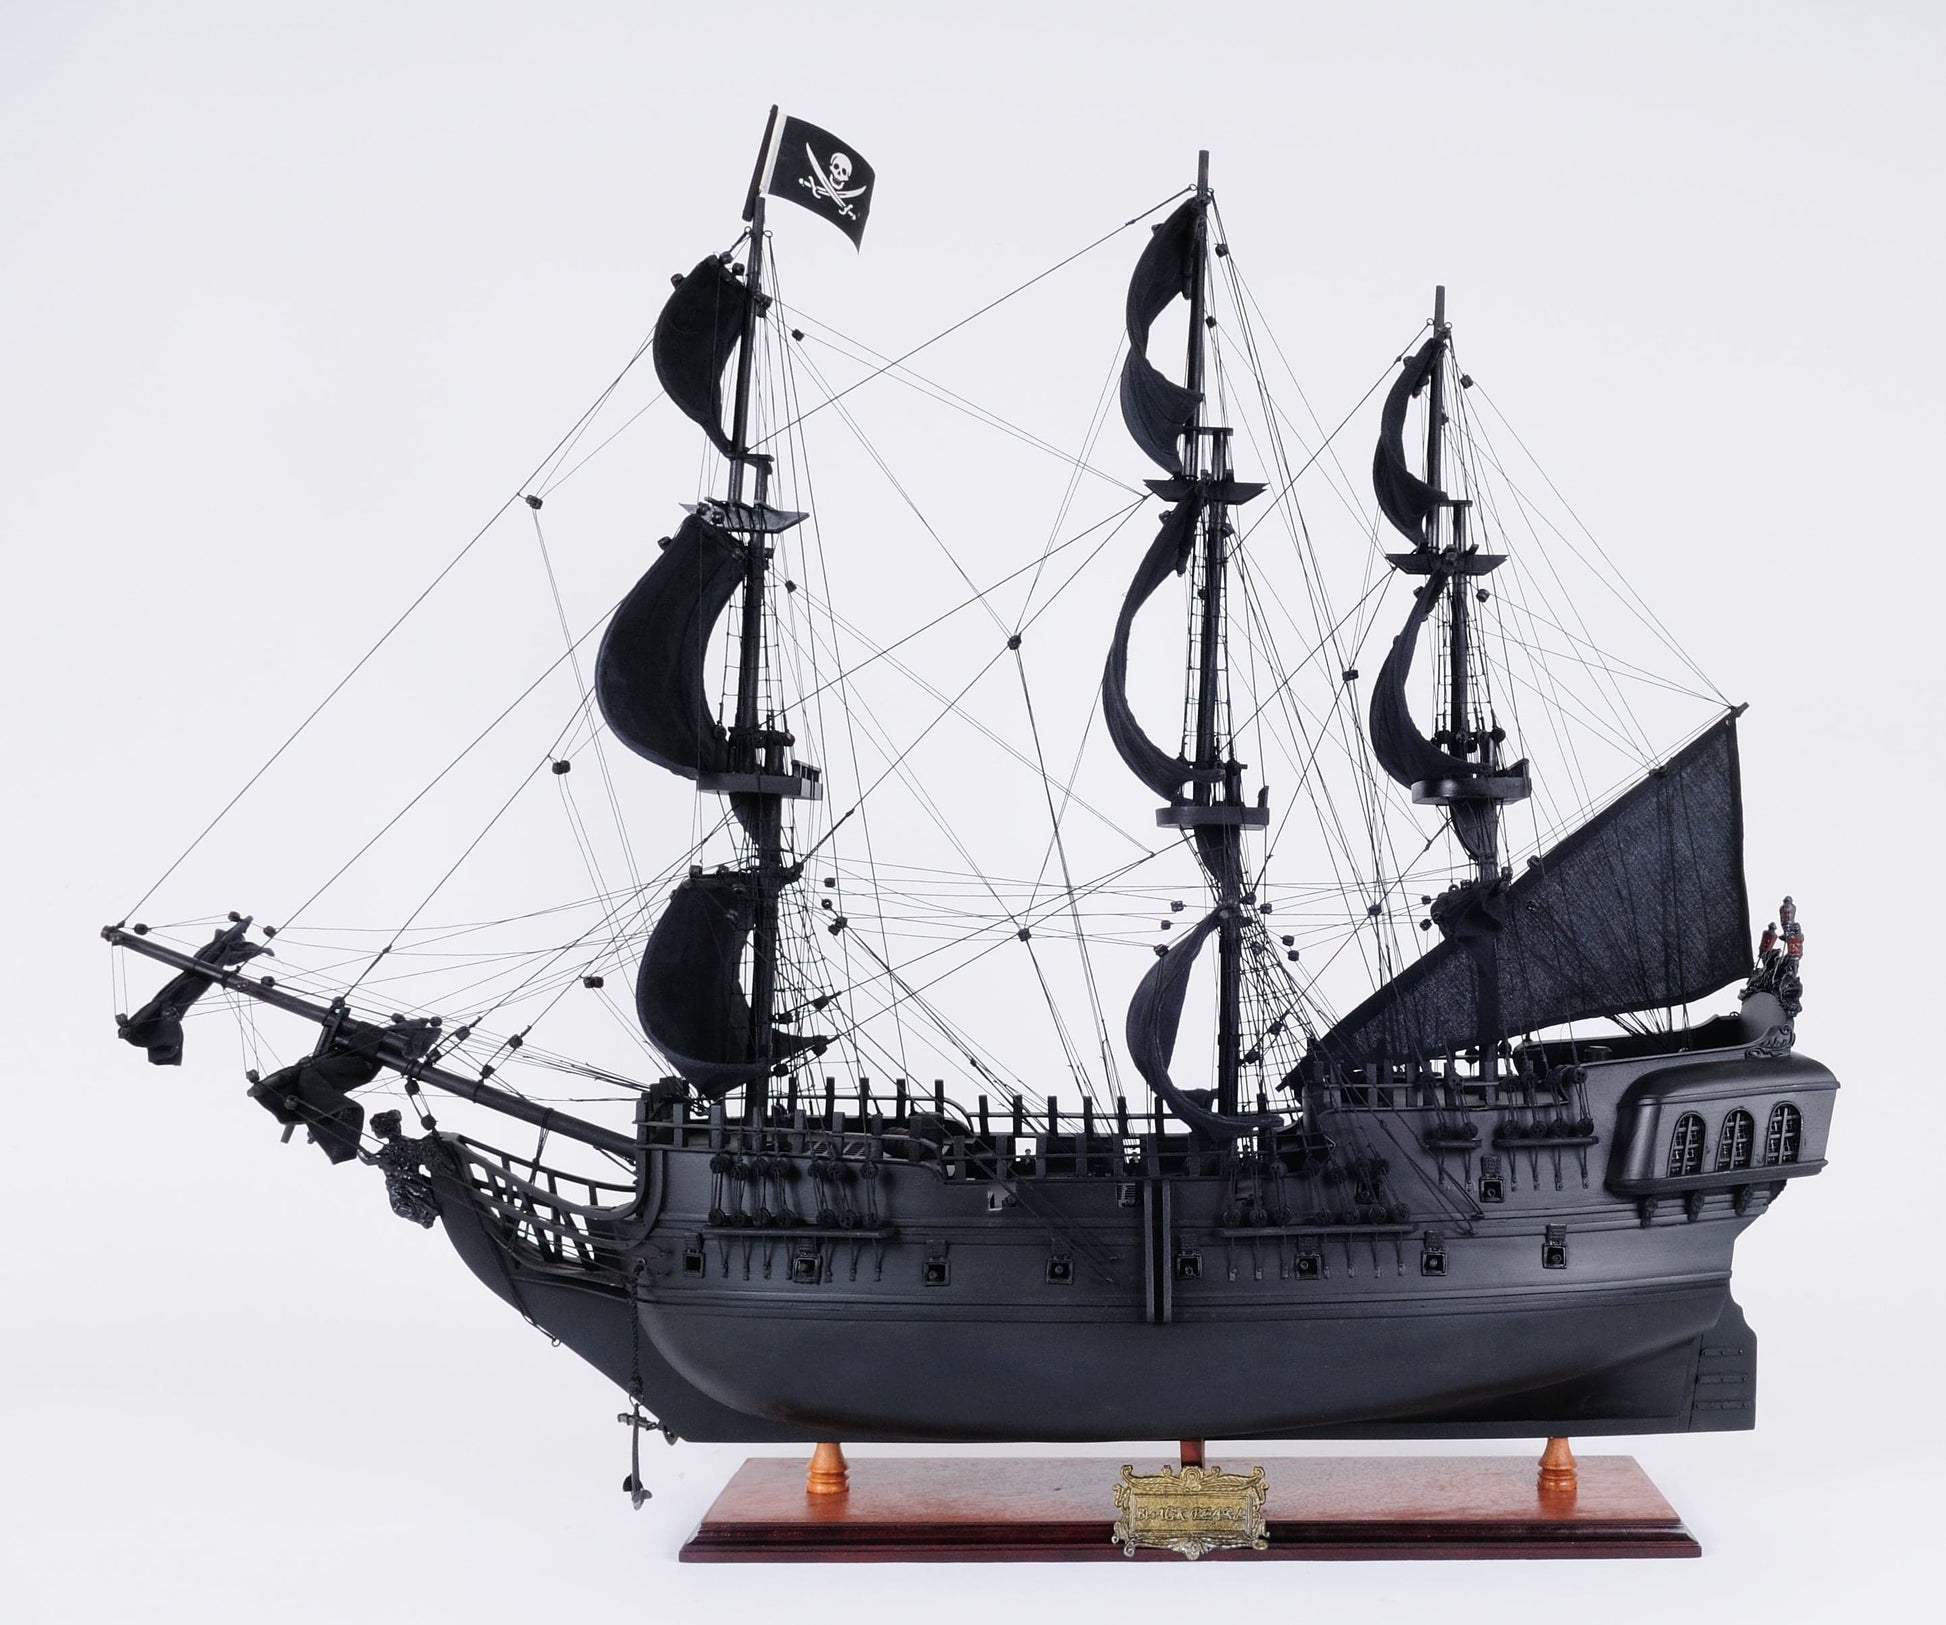 ALDO Hobbies & Creative Arts> Collectibles> Scale Model L: 35.4 W: 13.5 H: 29.5 Inches / NEW / Wood Black Pearl Pirates of The Caribbean Medium Tall Ship Wood Model Sailboat With Table Top Display Case Front OpenAssembled